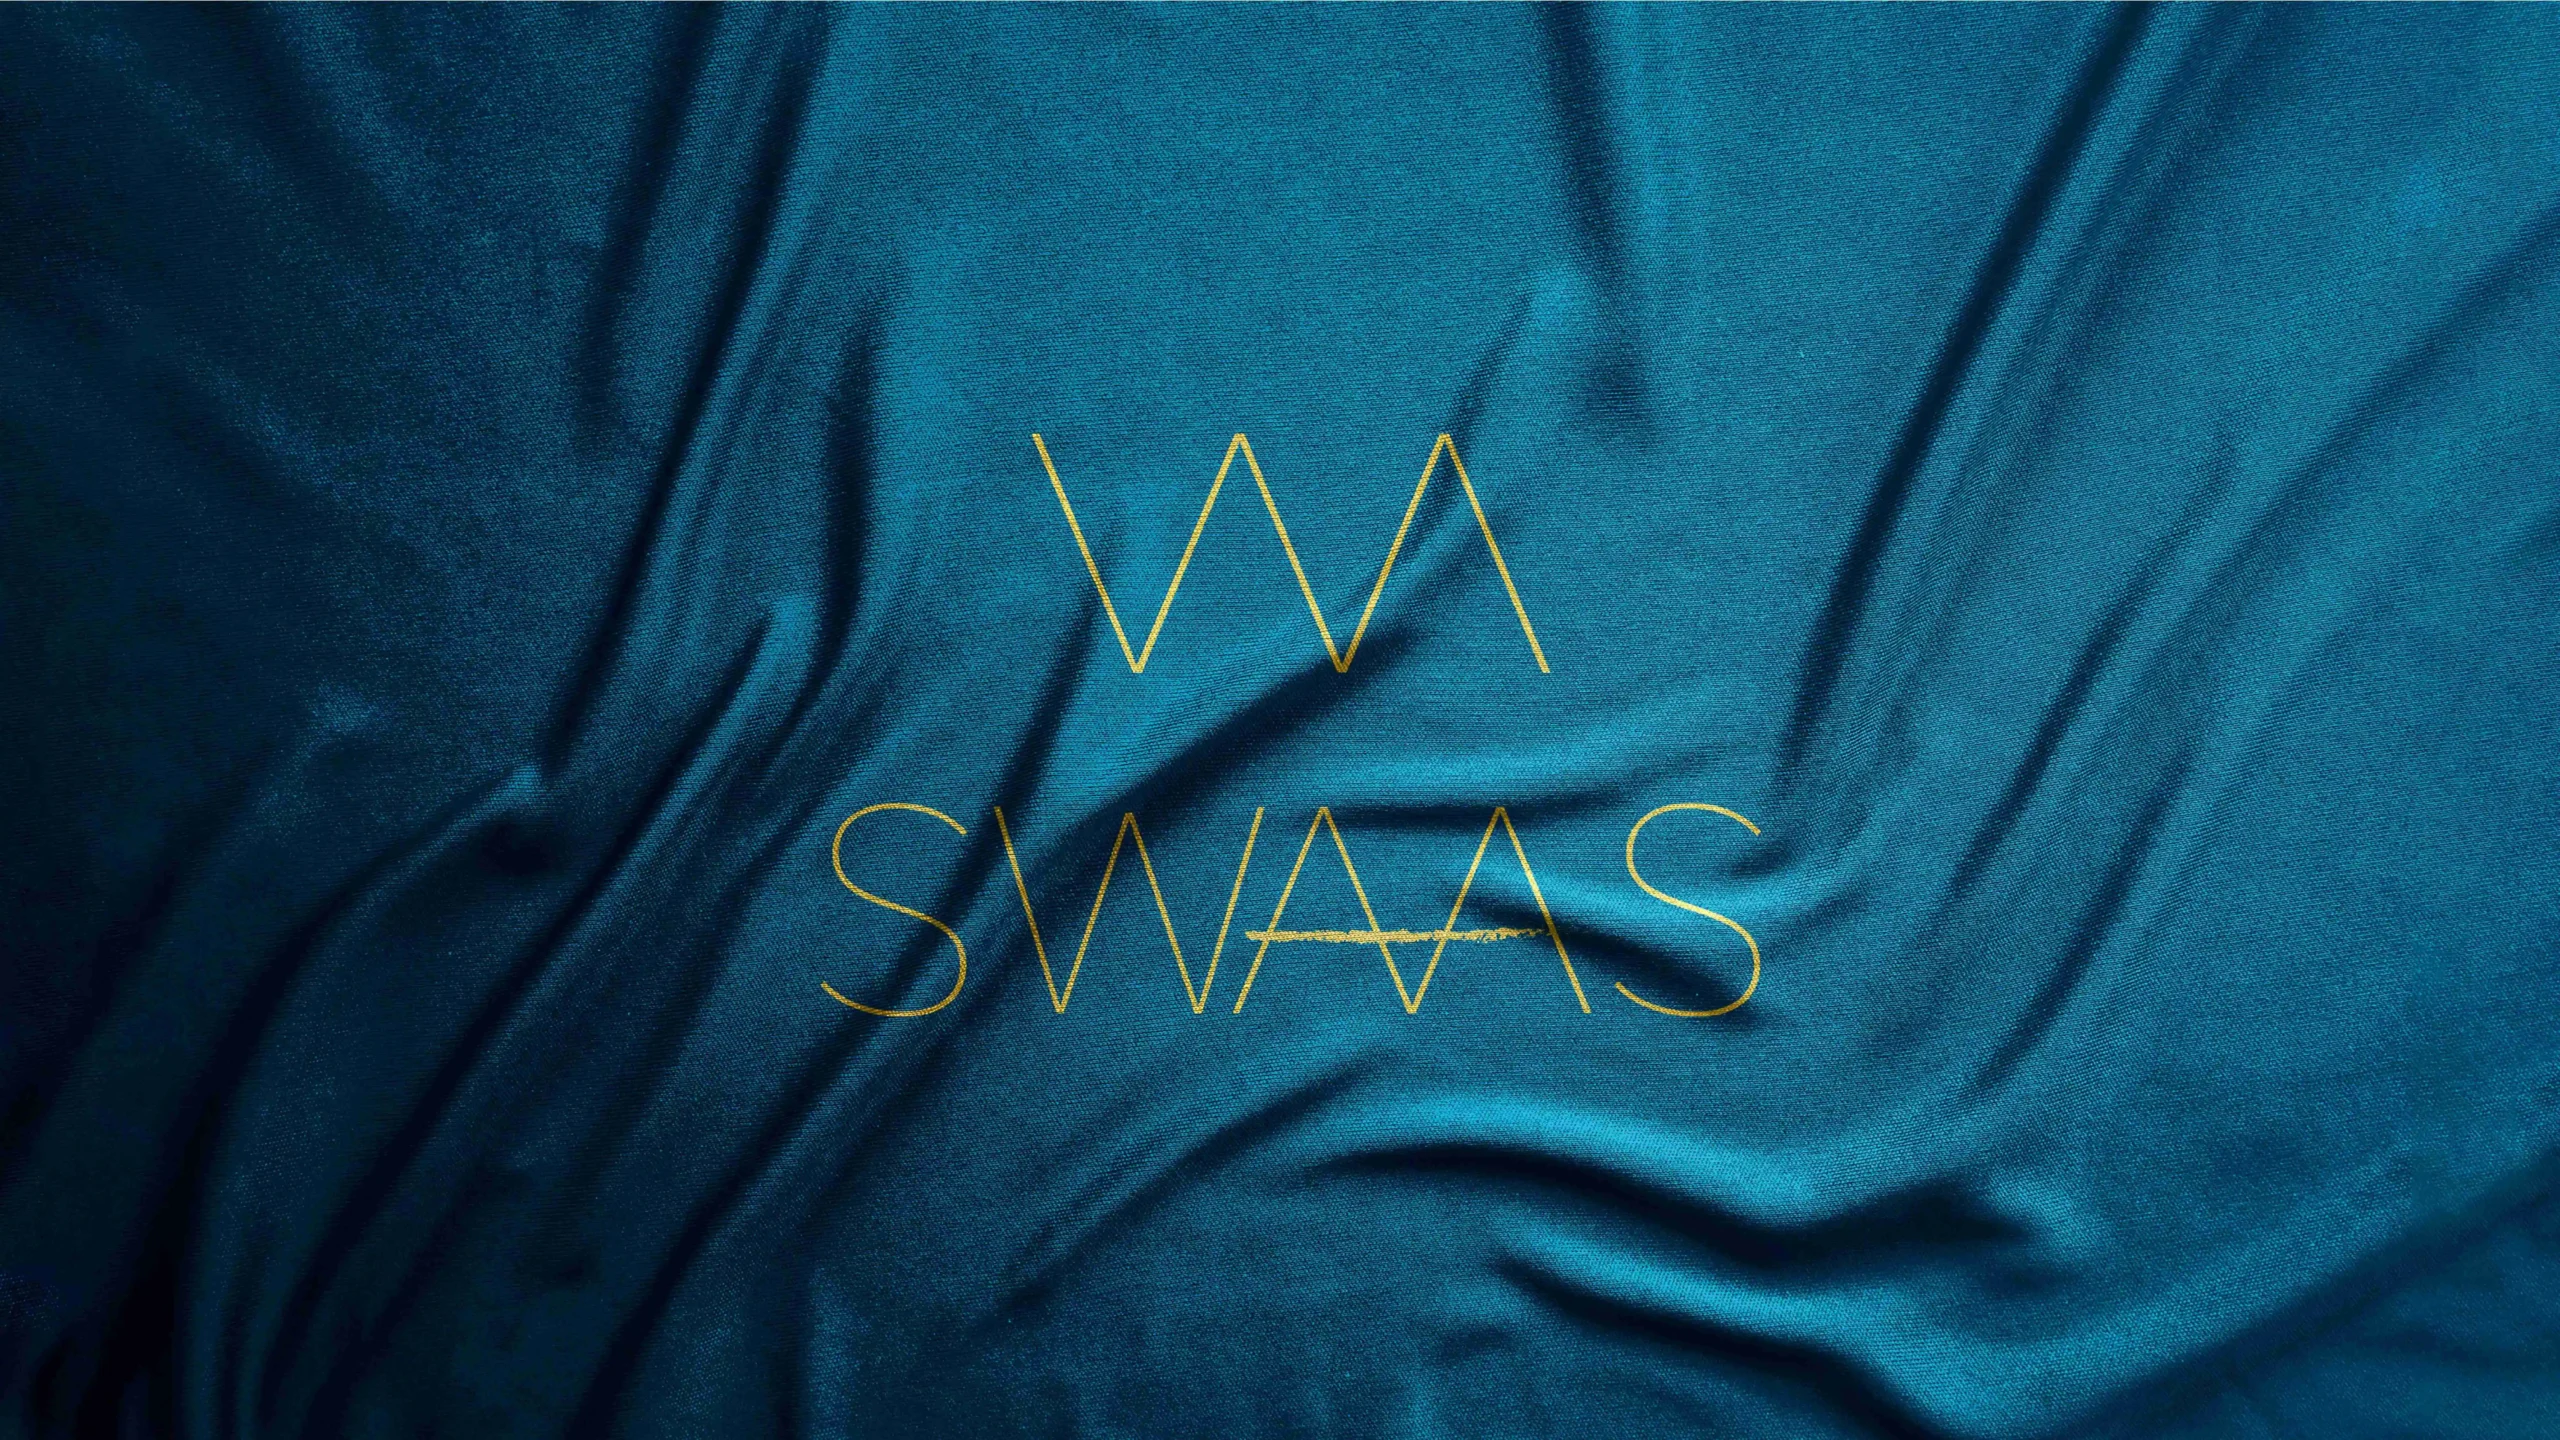 Swaas logo featuring organic, nature-inspired elements.